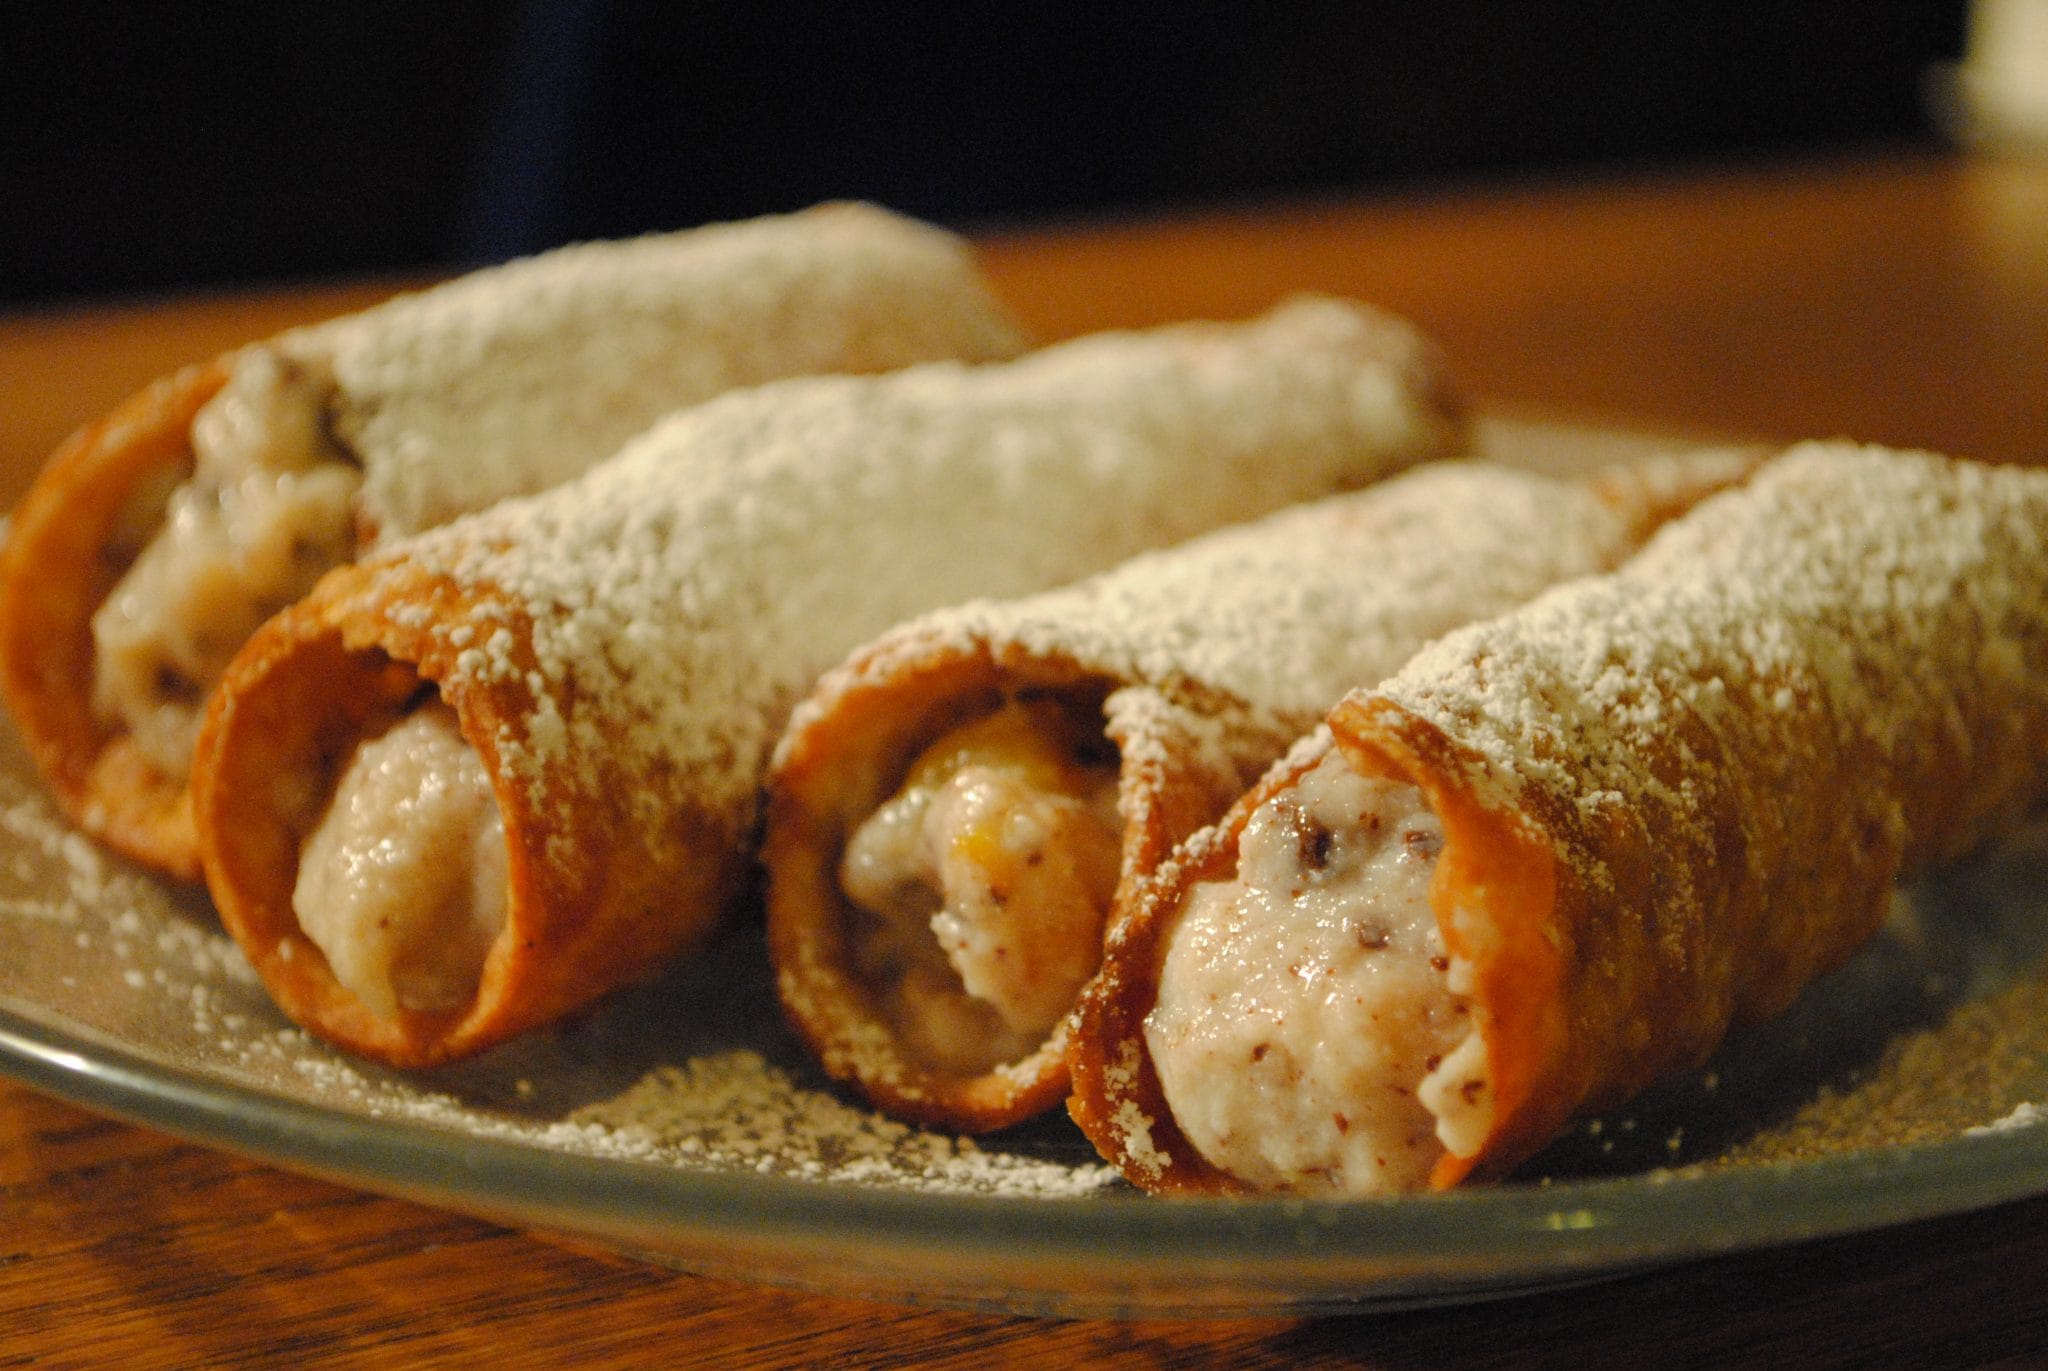 Side view of stuffed cannoli on a plate.